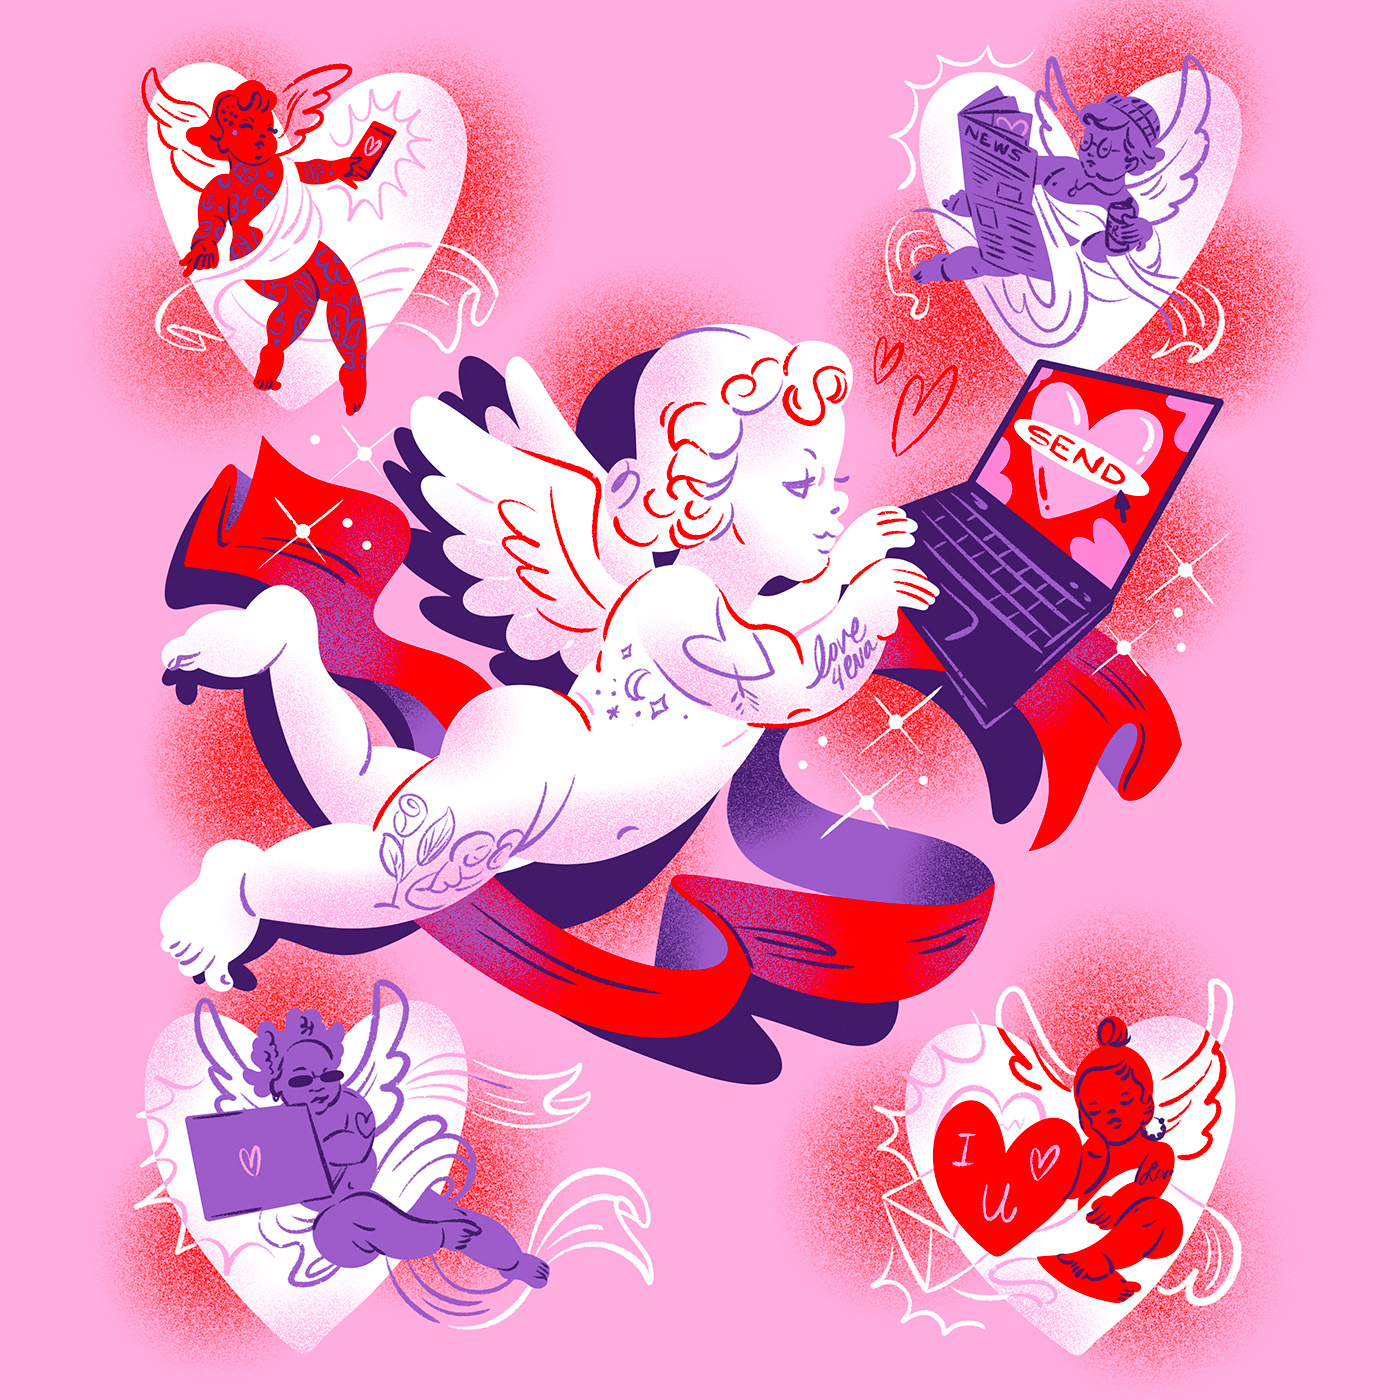 Illustration of Cupid sending valentines to other cherubs via newspaper ads, text, card and digital.